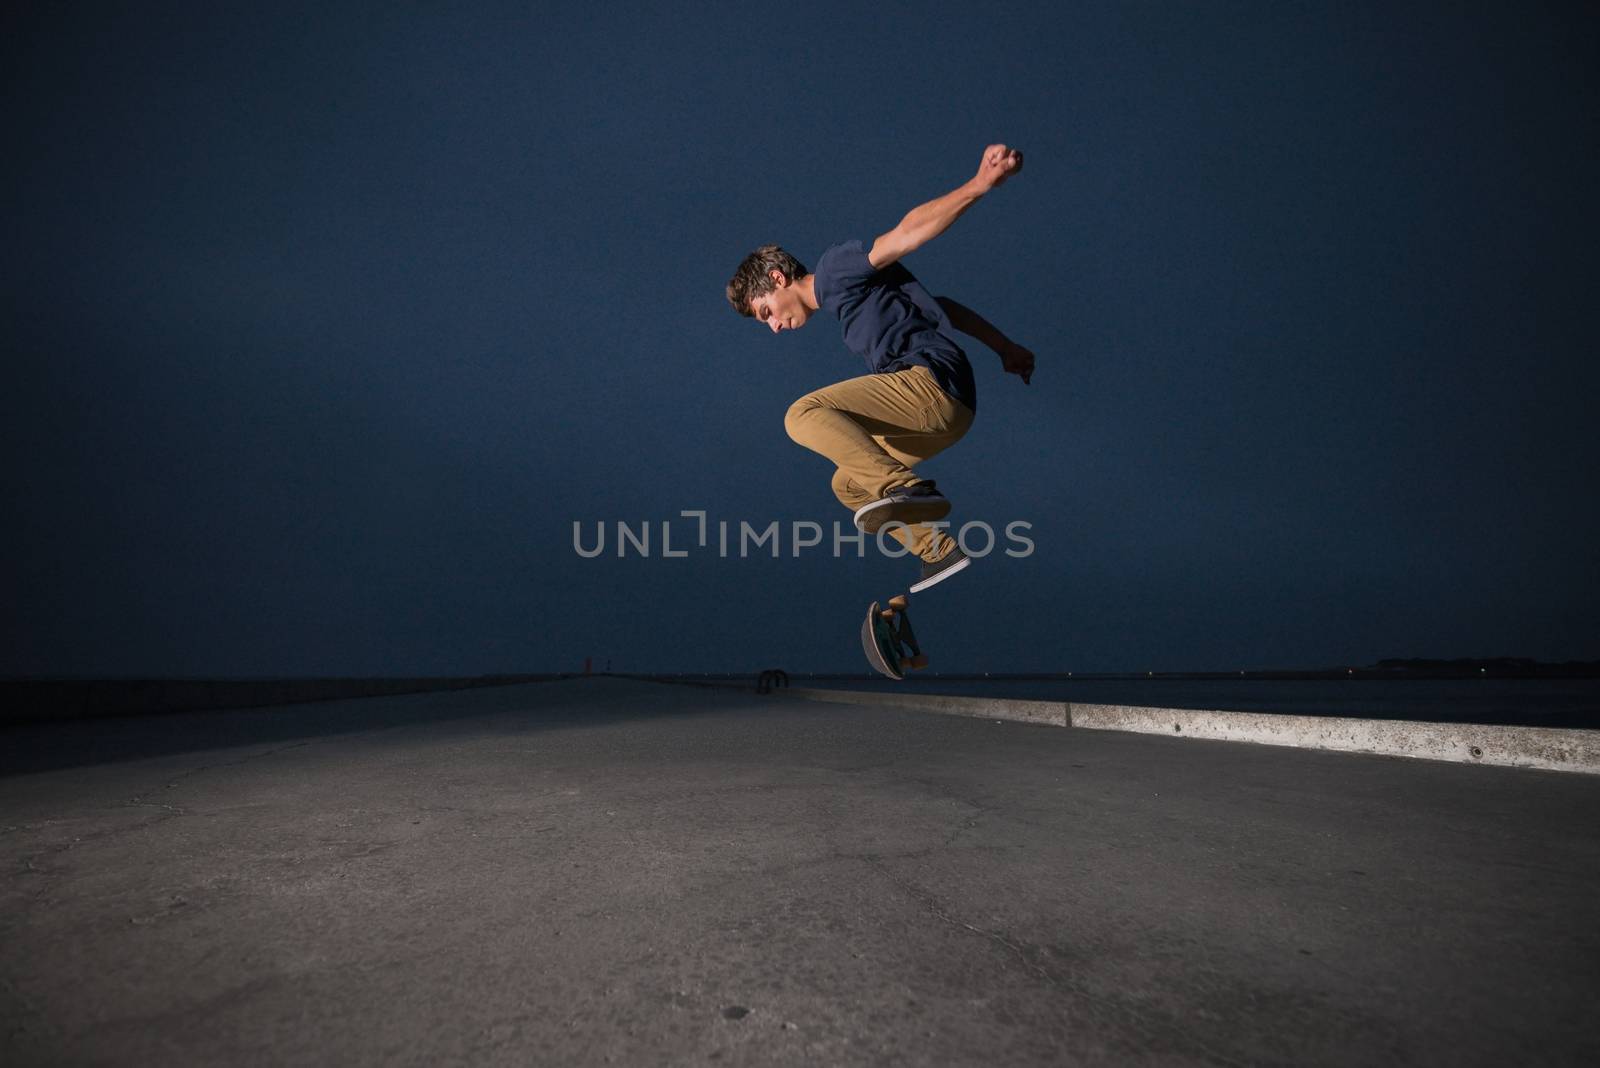 Skateboarder performing a ollie flip on a concrete pavement by homydesign